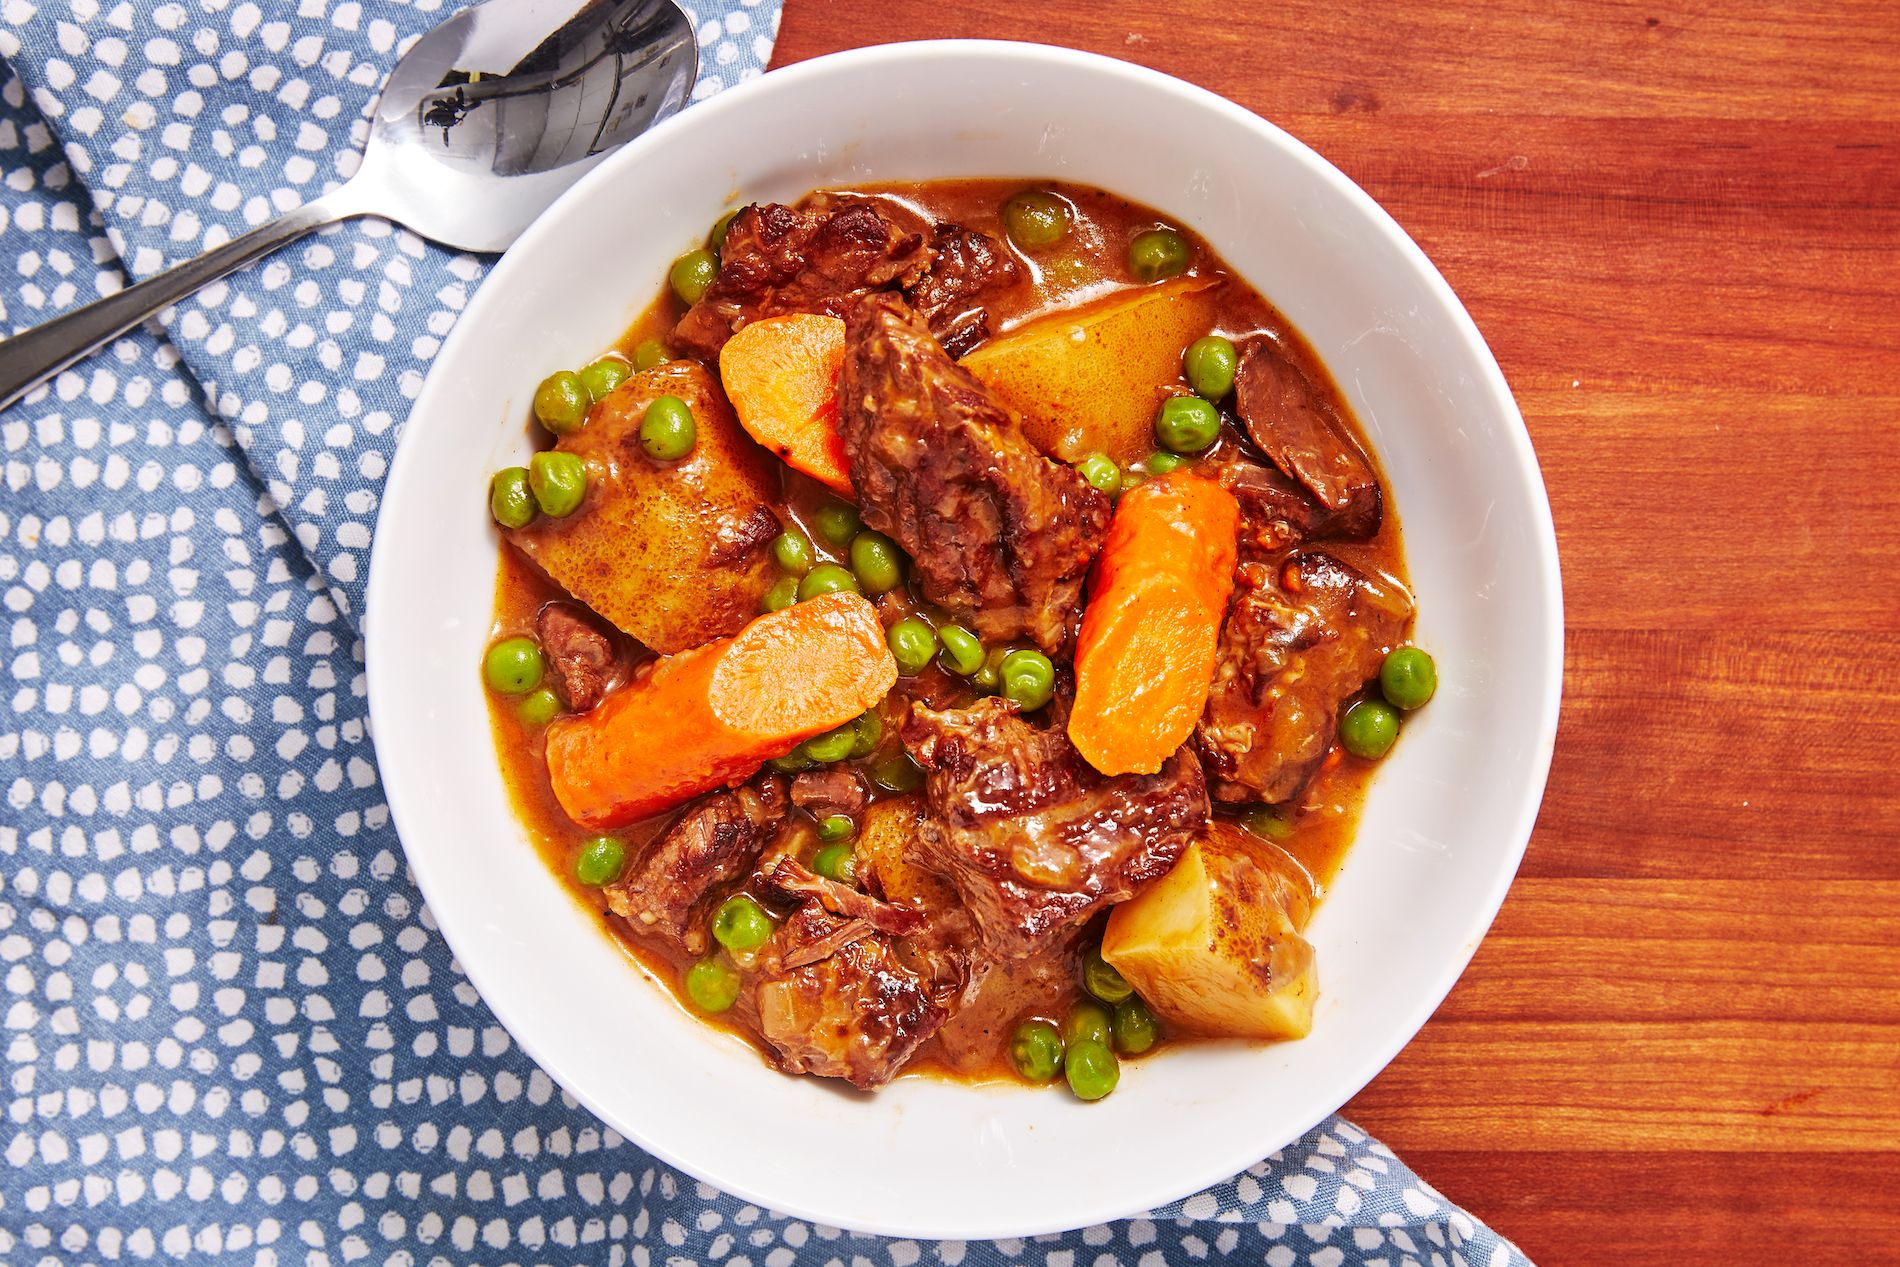 Steps to Prepare Beef Stew Instant Pot